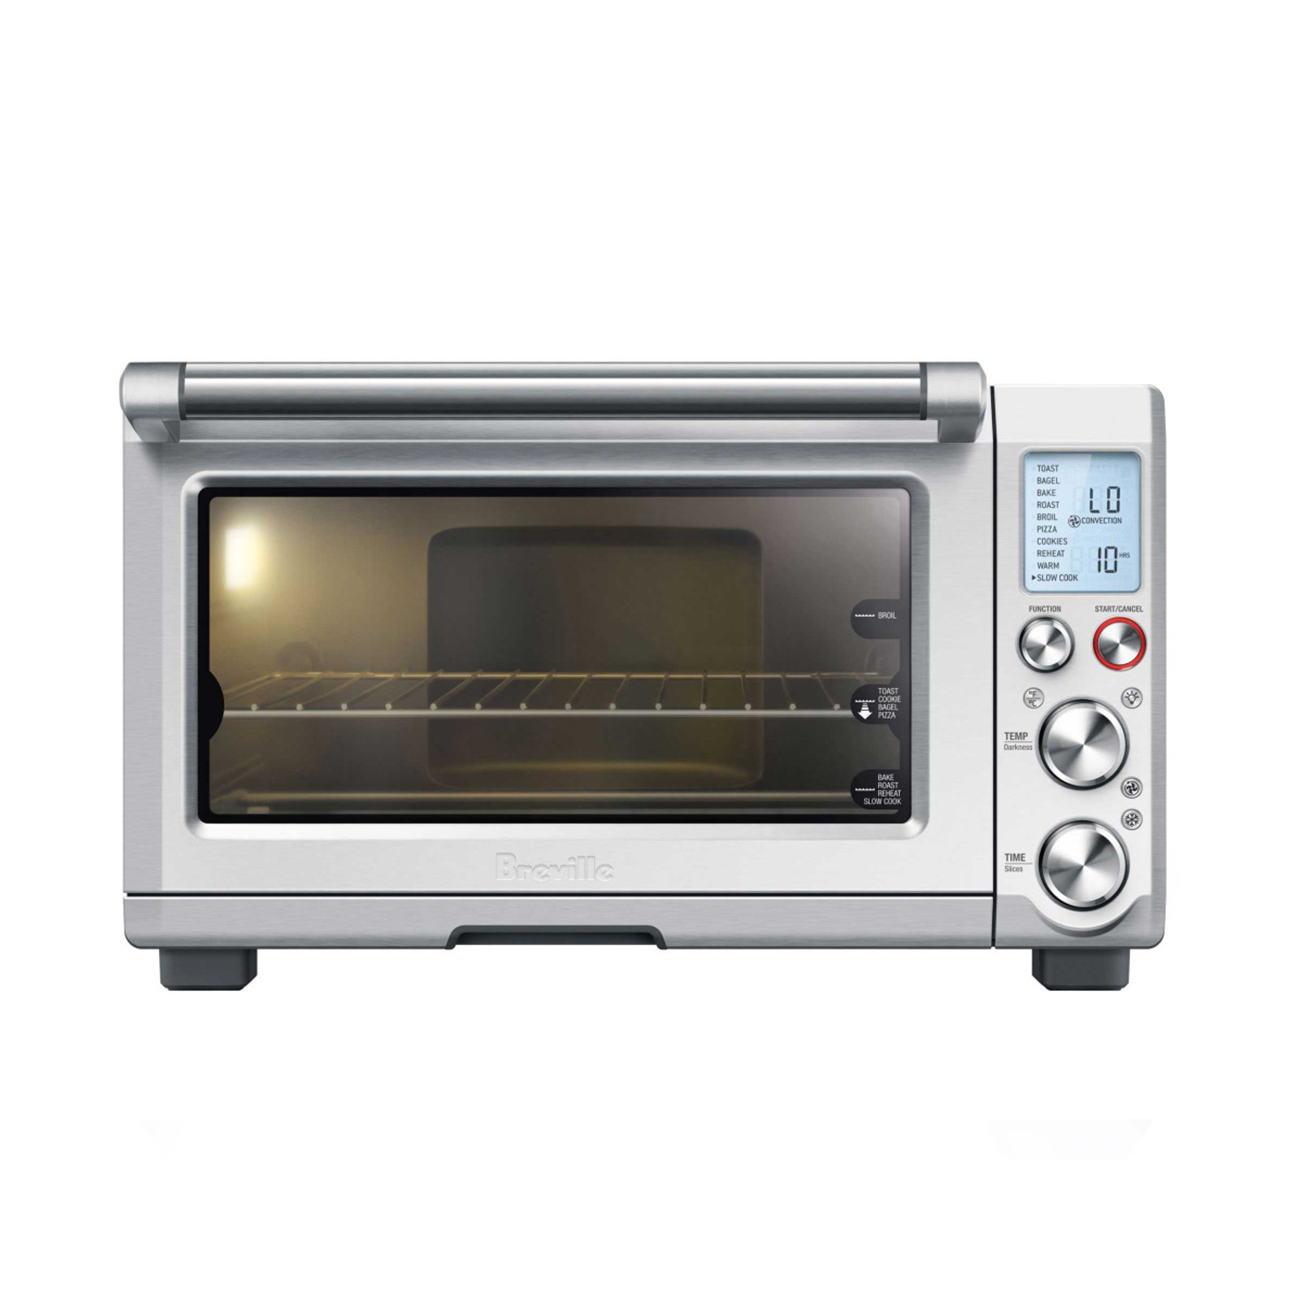 https://www.breville.com/content/dam/breville/ca/catalog/products/images/bov/bov845bss1bca1/pdp.jpg?pdp